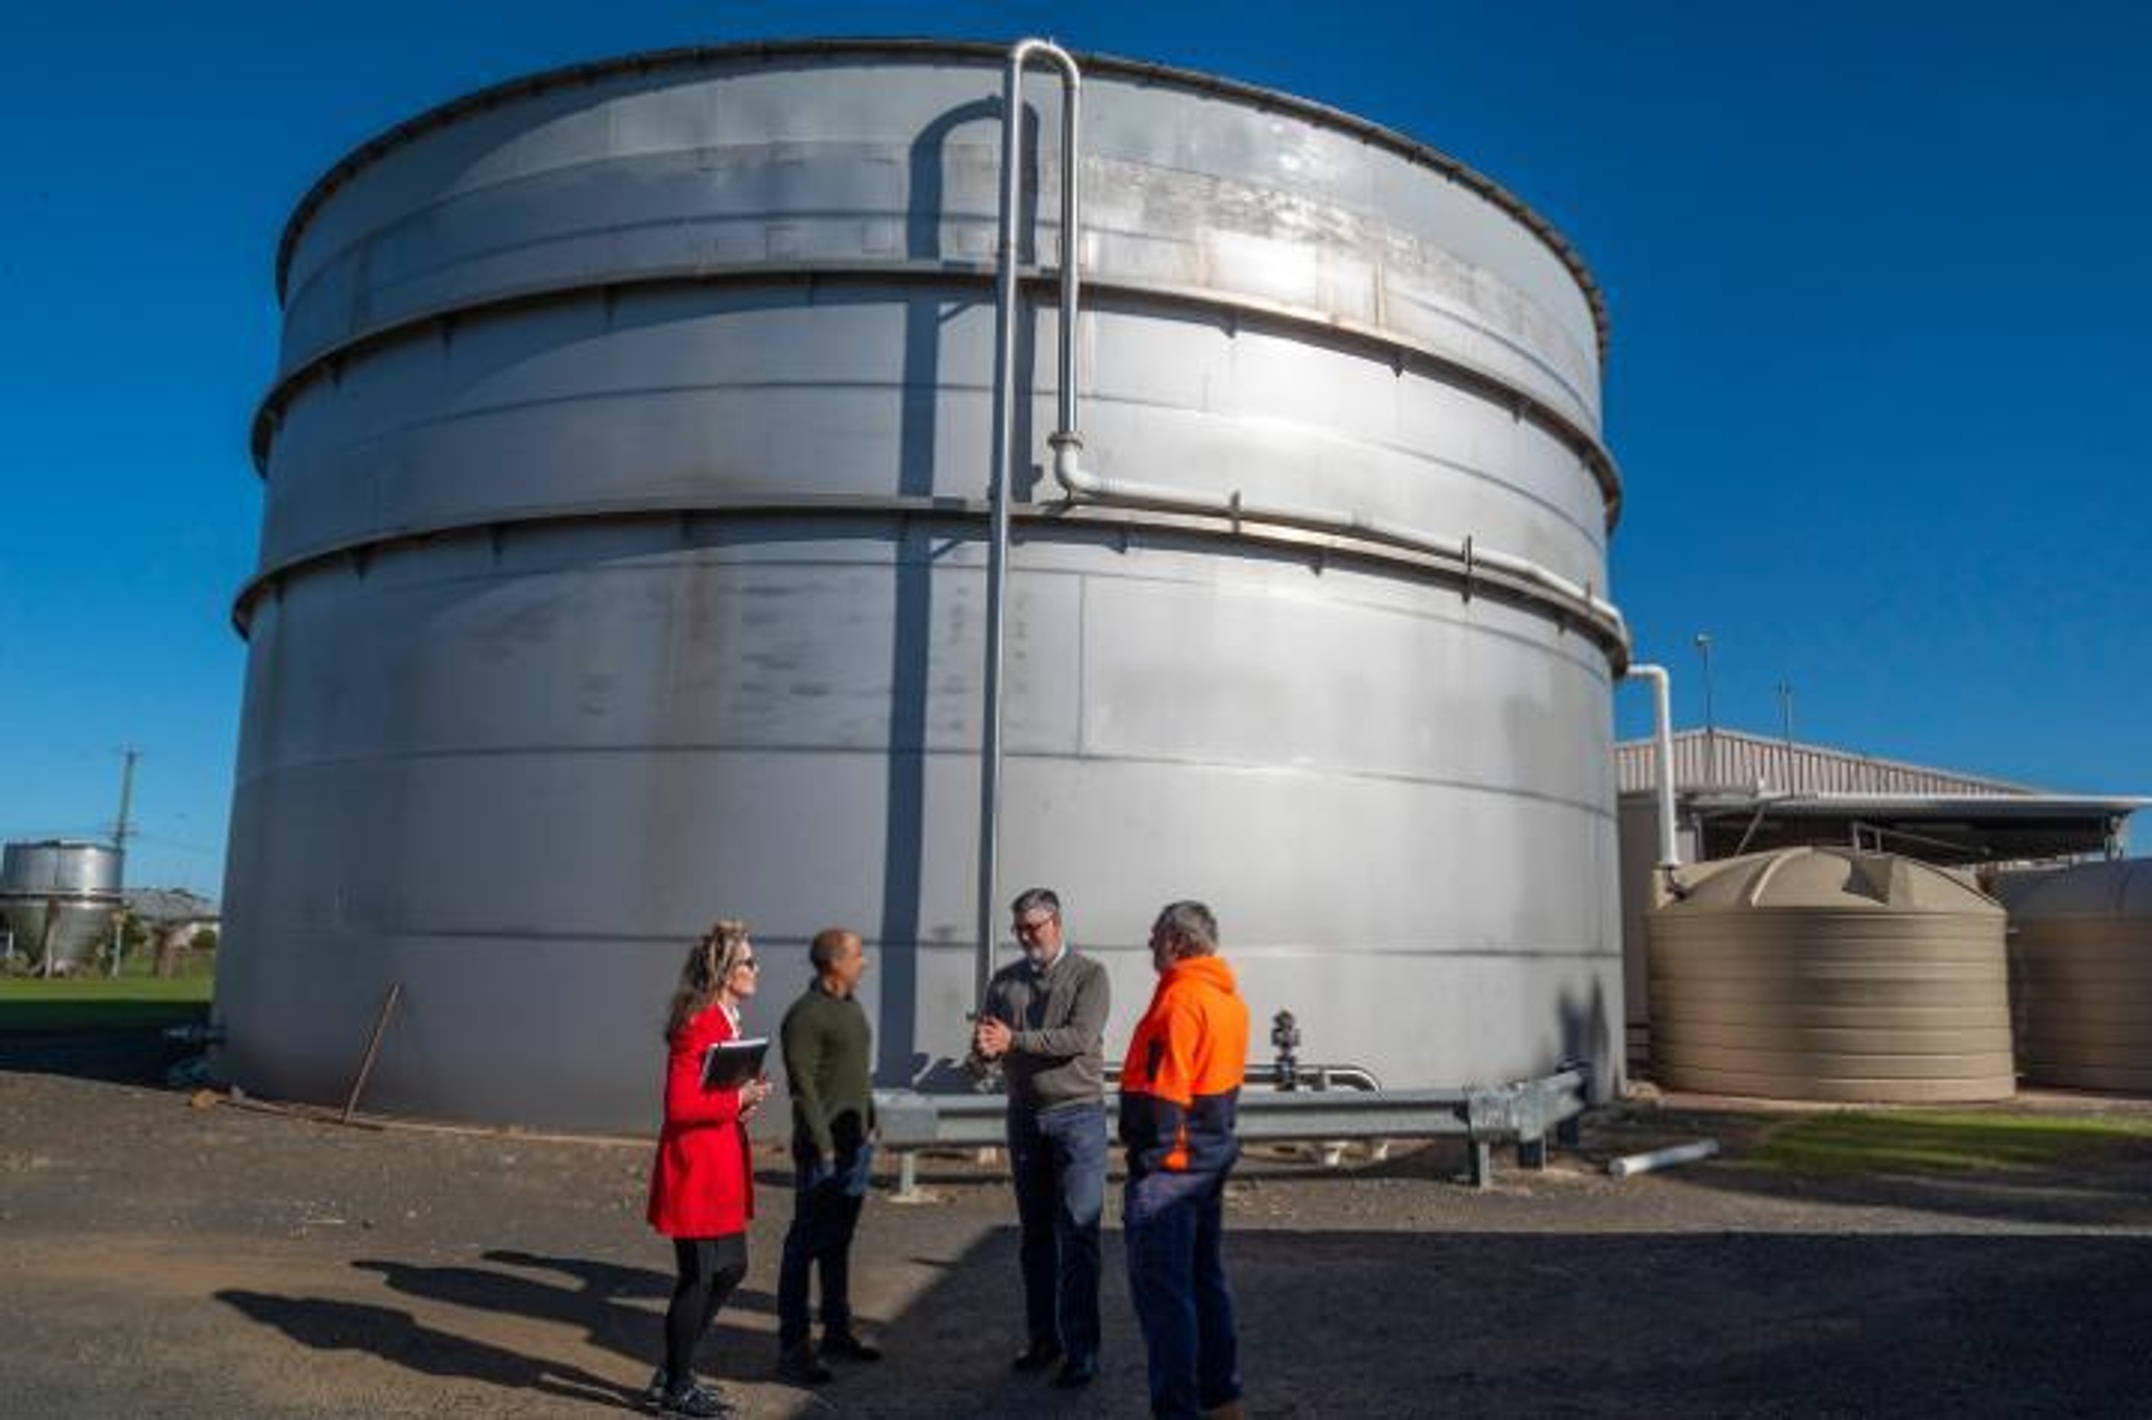 A group of people in front of a large silo